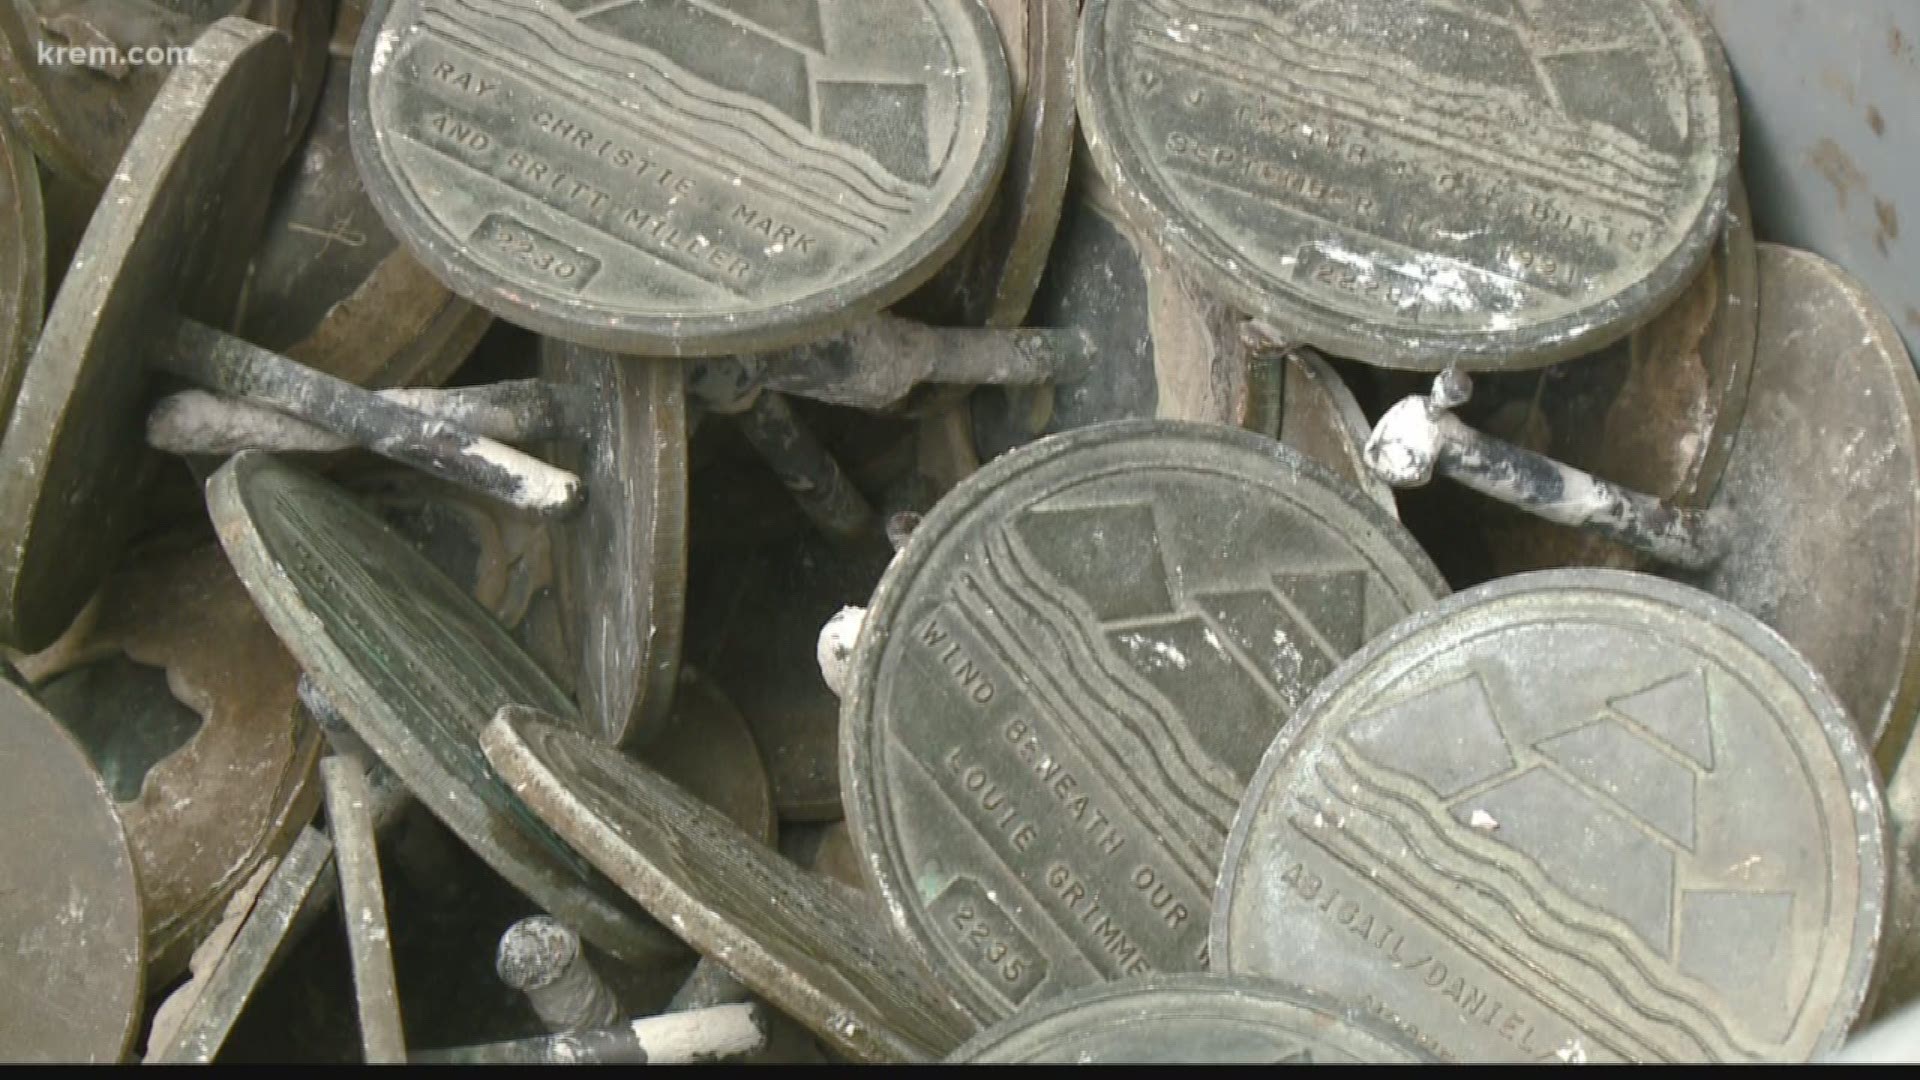 KREM Reporter Tim Pham met with a man with a special connection to the Centennial Trail medallions after hundreds were stolen in the past weeks.